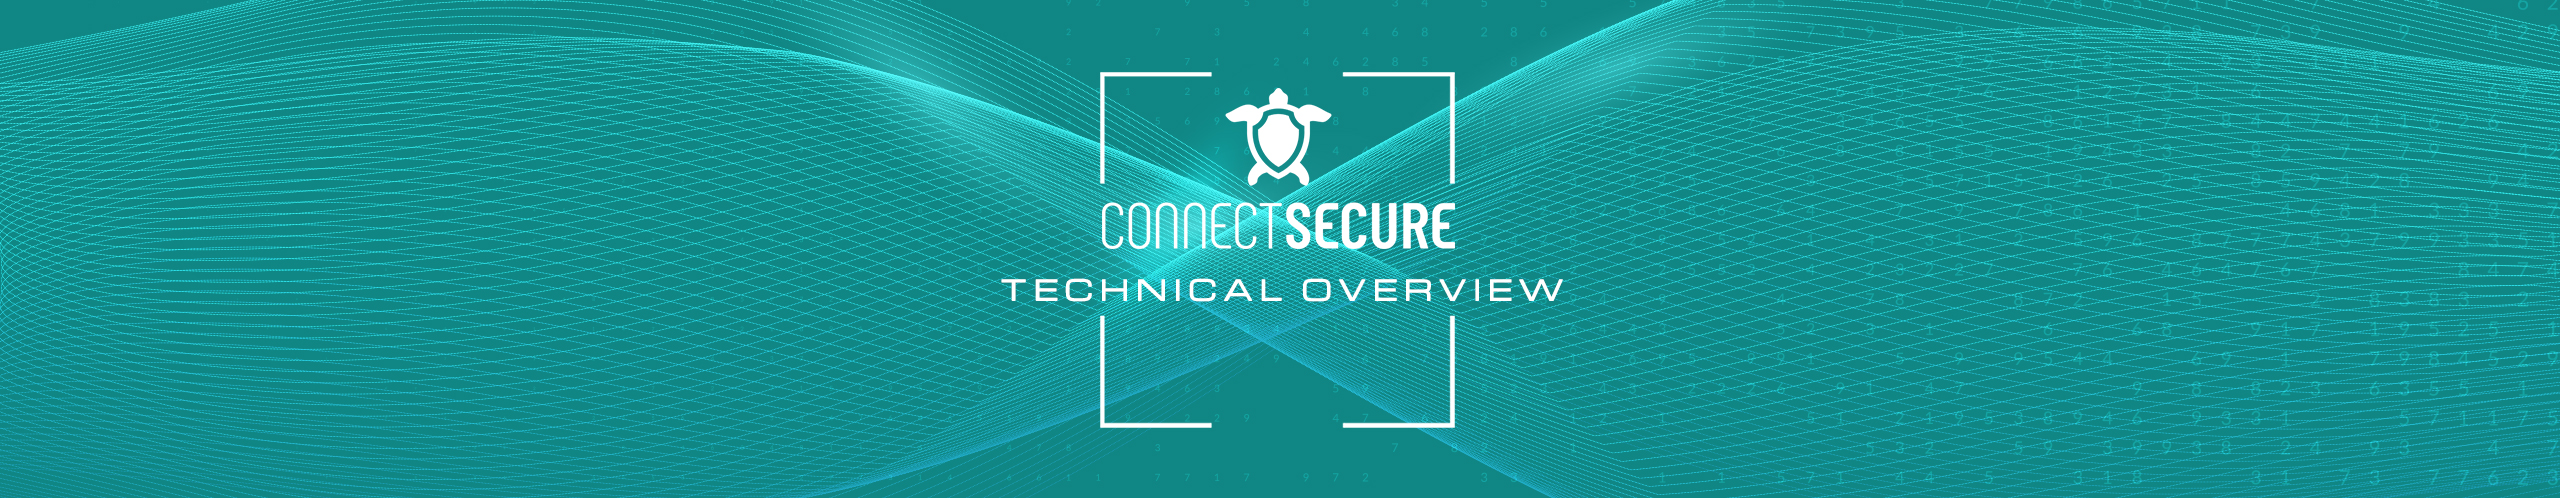 ConnectSecure